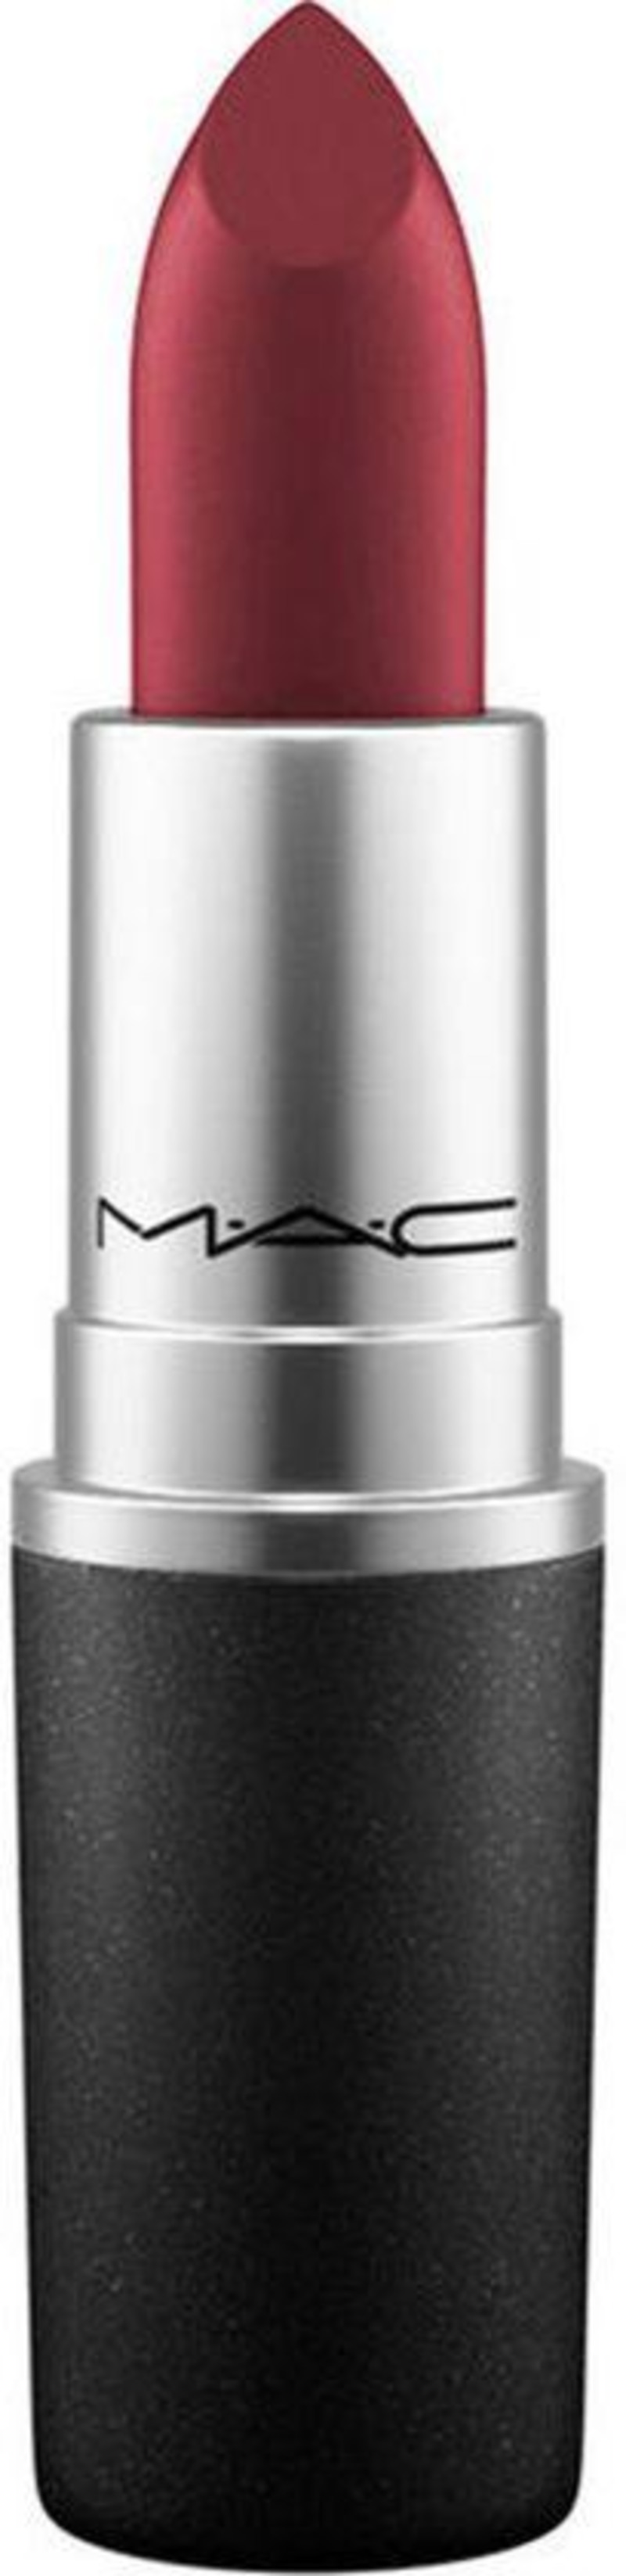 MAC Cosmetics Matte Lippenstift - Diva | MAC Cosmetics Absolutely the finest I have. las Are Eves: honest cosmetic reviews.